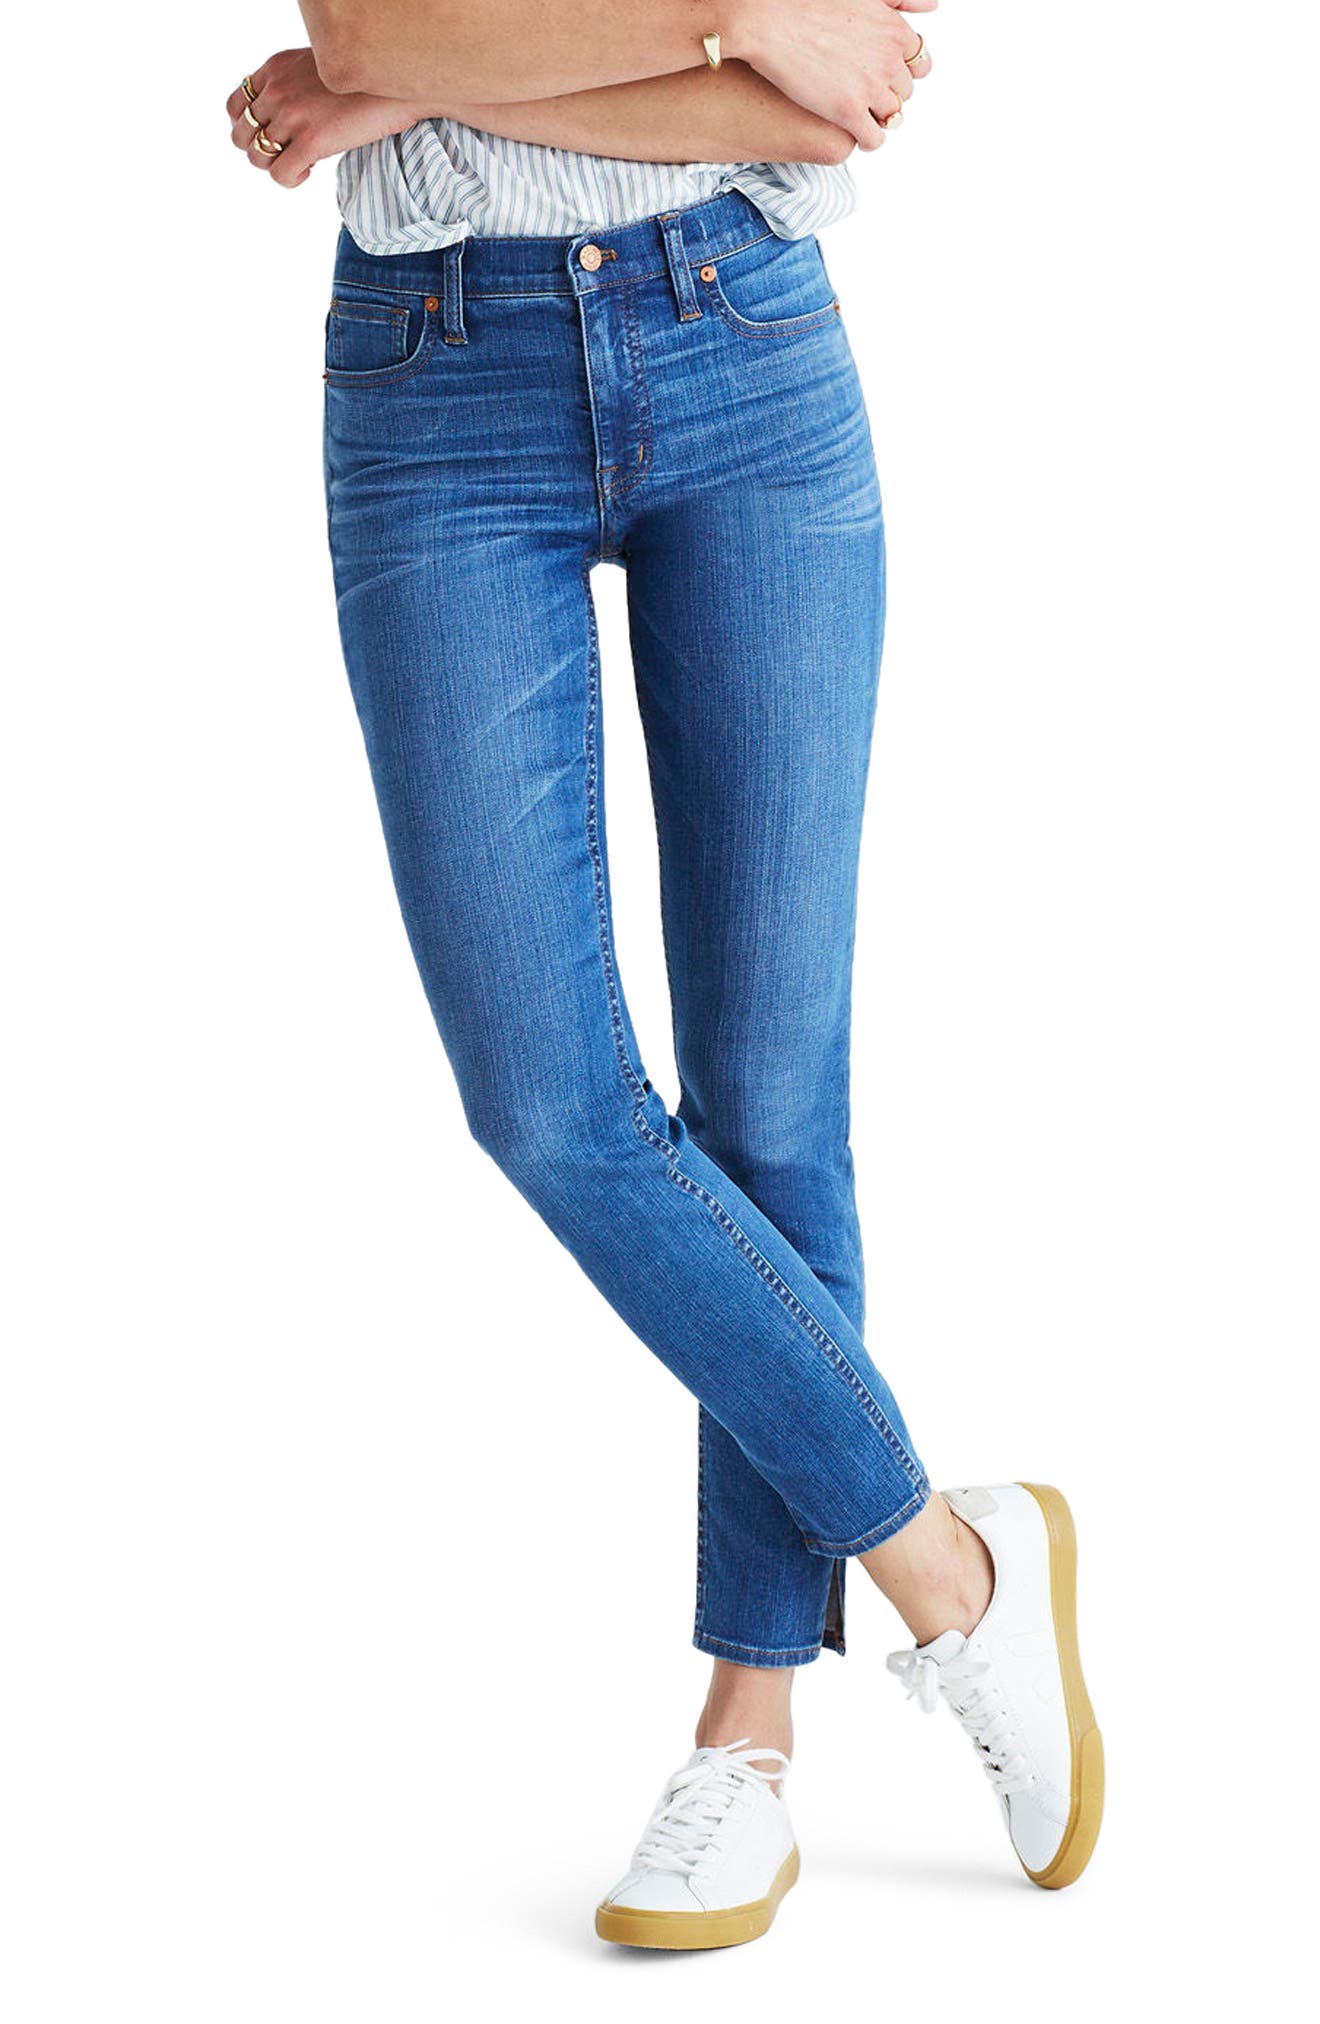 madewell 9 inch skinny jeans